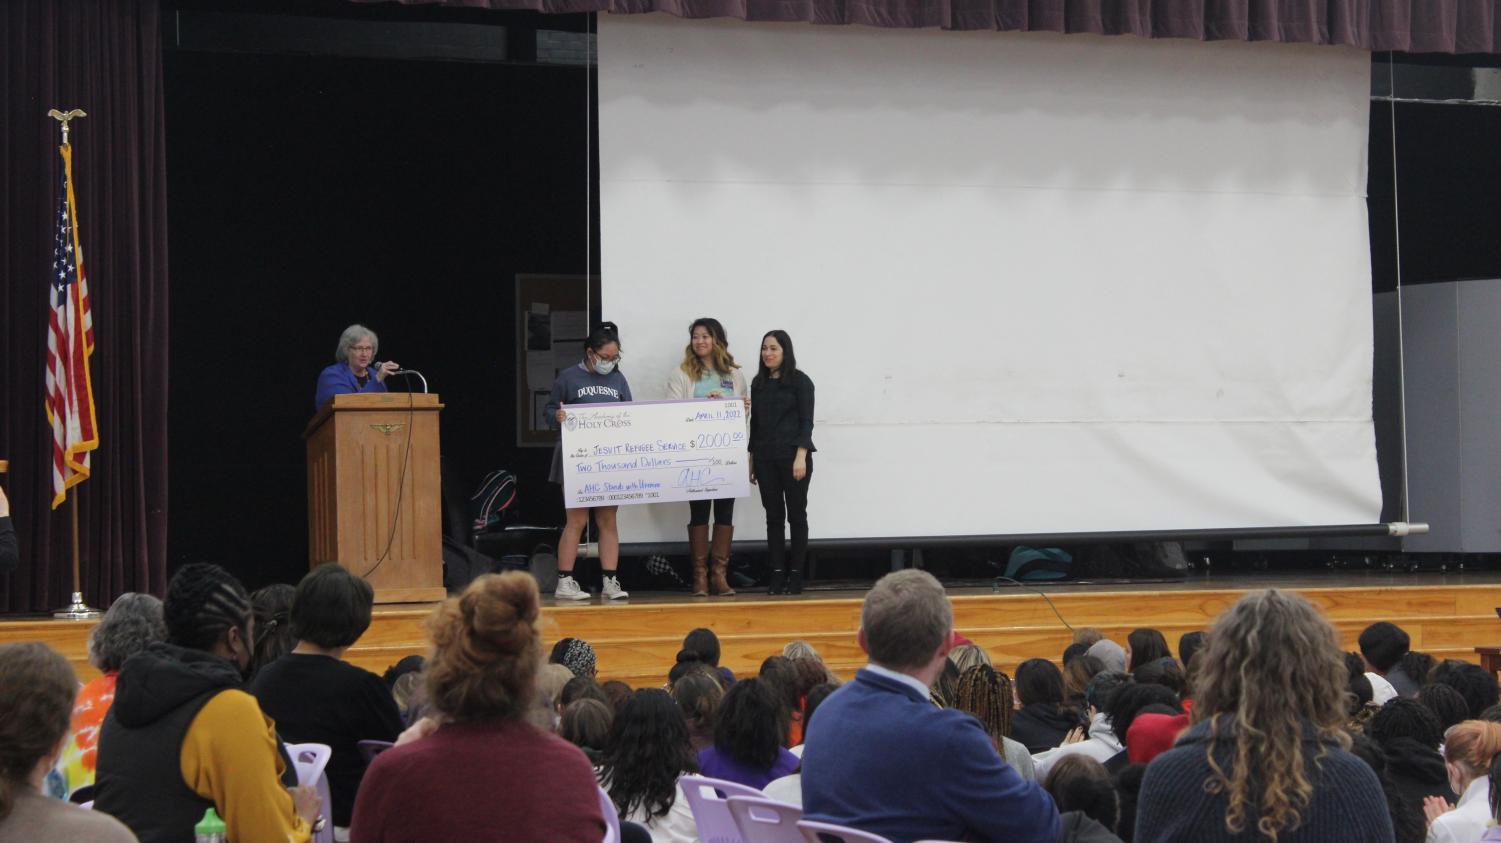 Ms. Prebble presenting a check to the Jesuit Refugee Service. The check was 2000 dollars that was raised during the Tartans for Ukraine week.